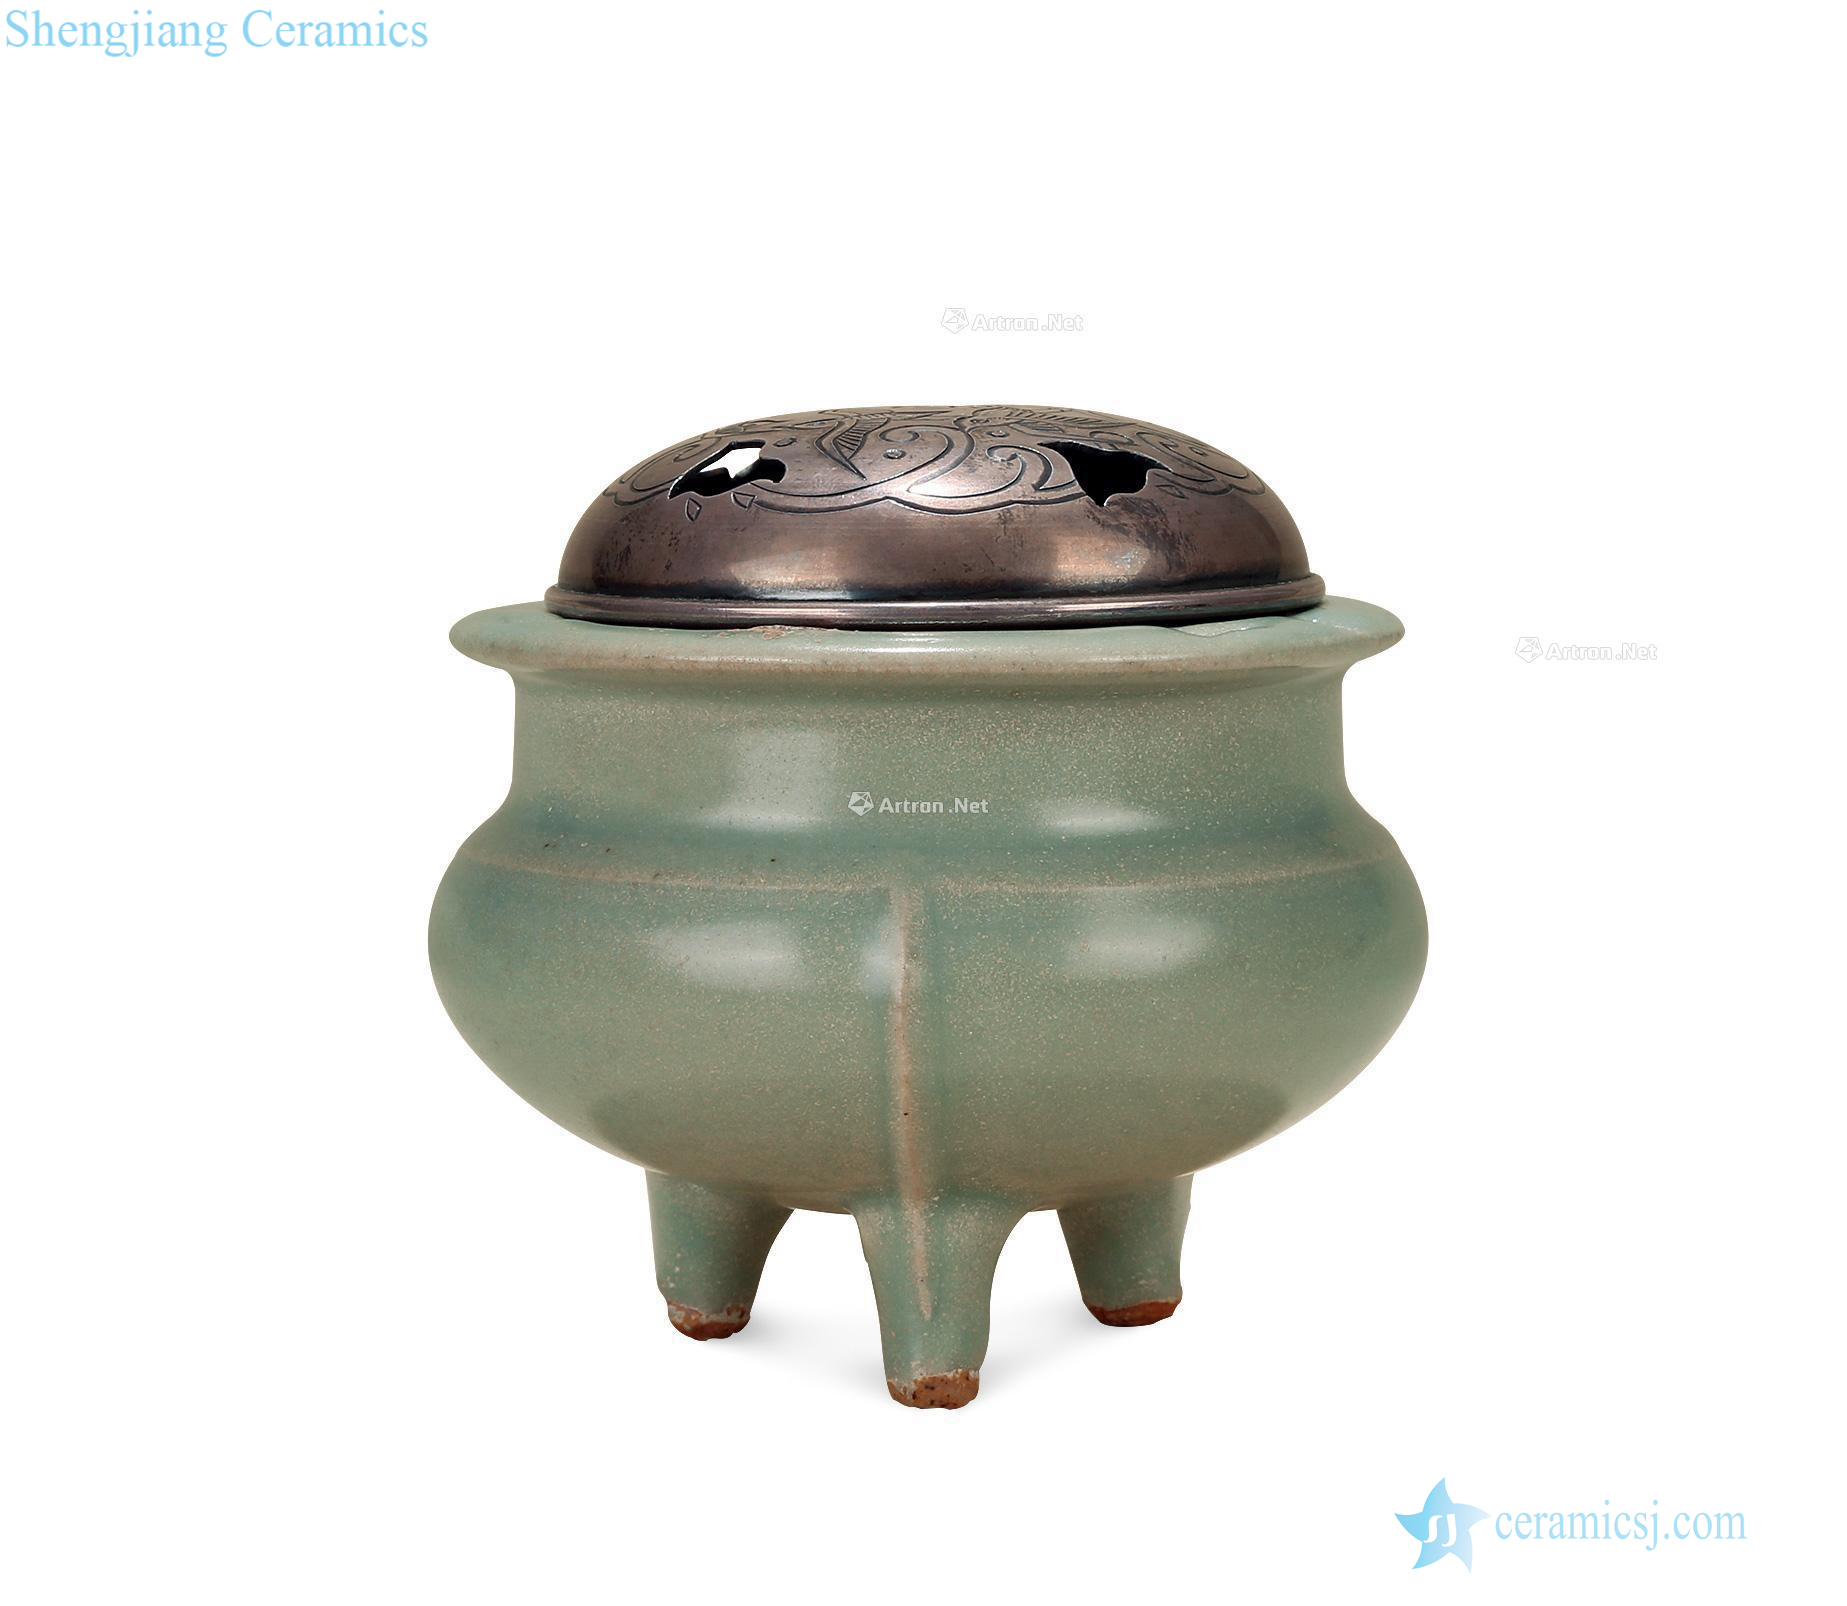 The southern song dynasty longquan celadon by furnace cover with silver